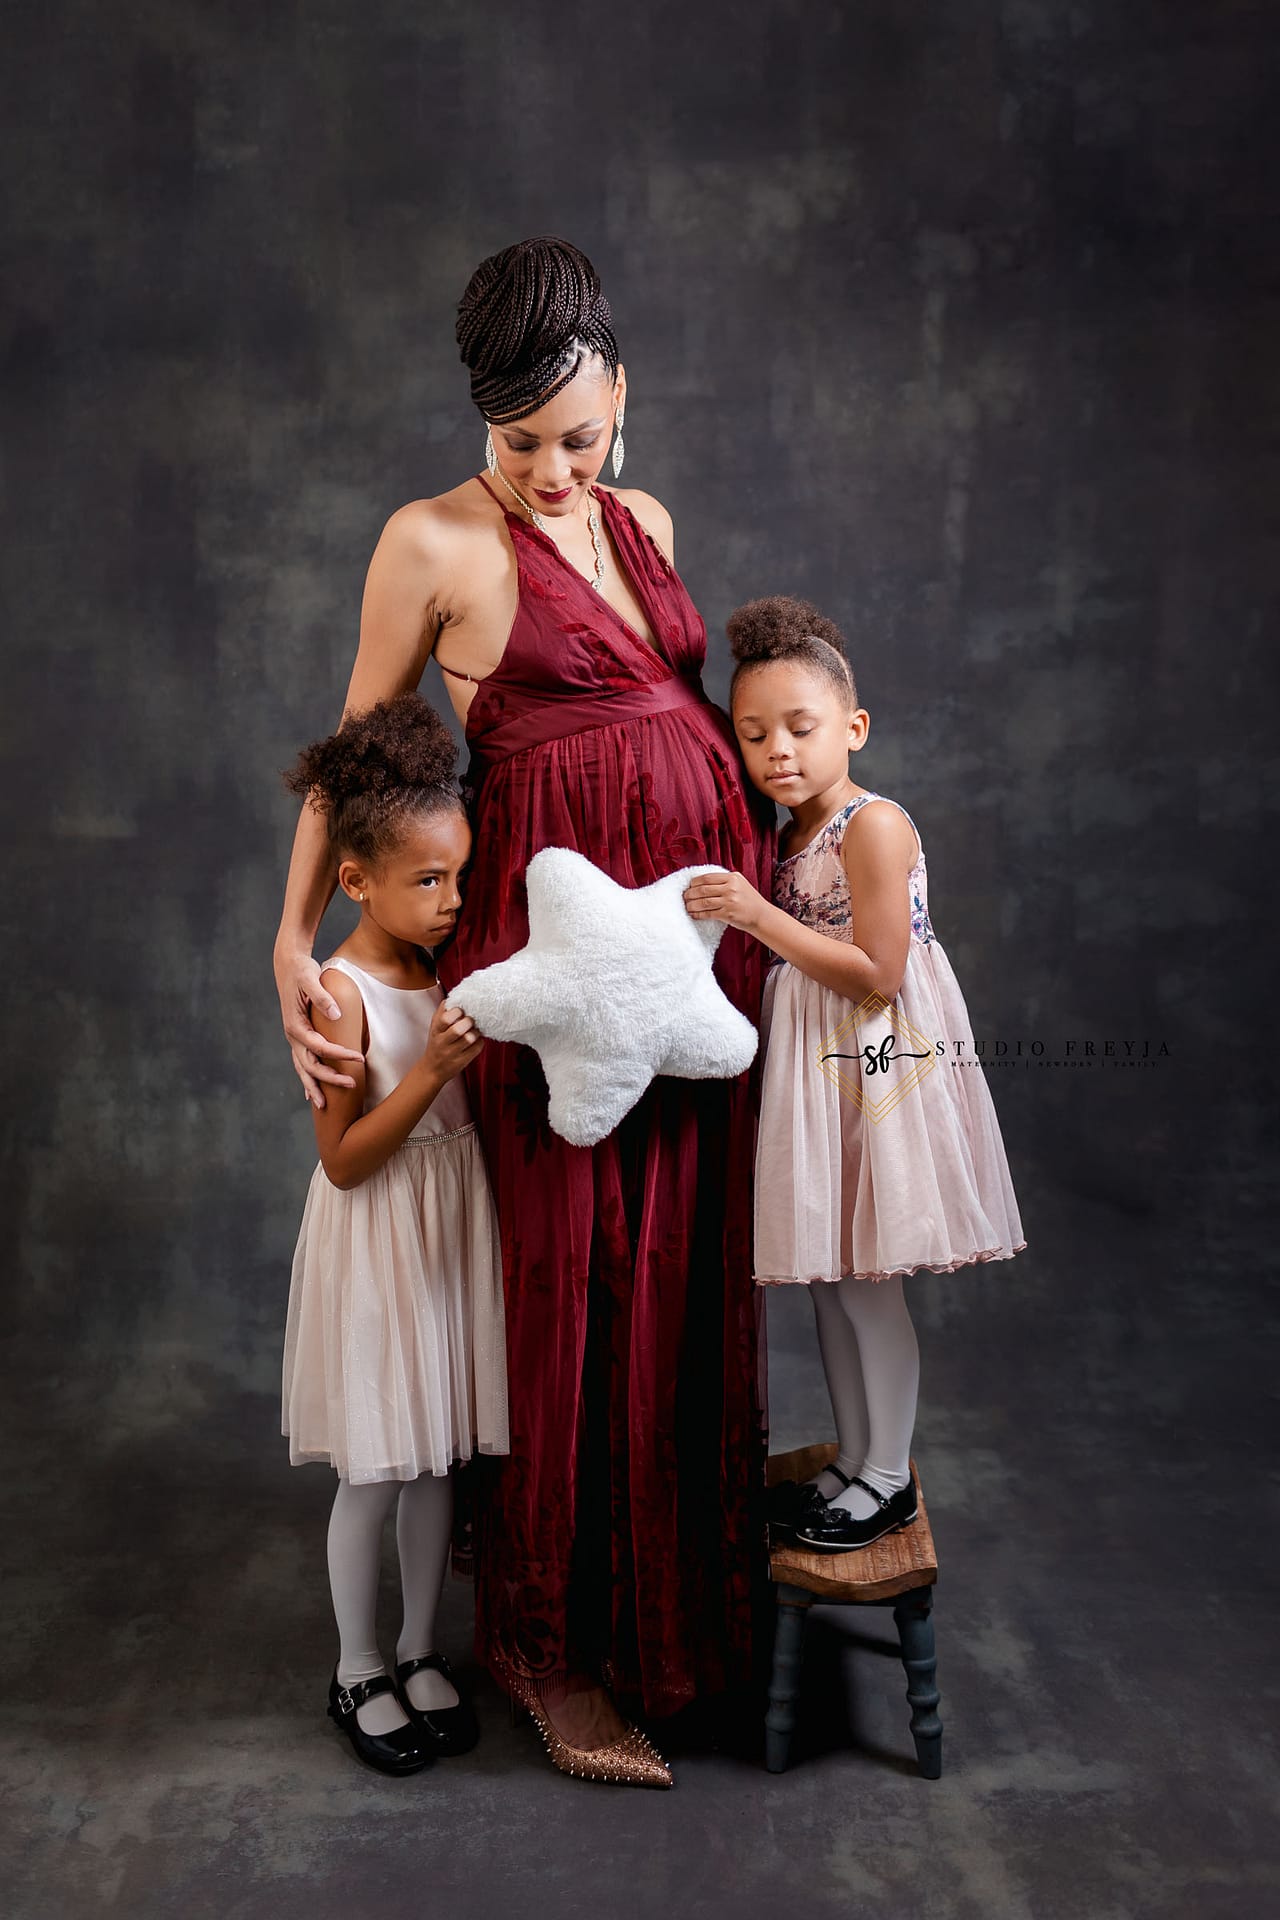 Mom and her daughters hugging a star during maternity session in San Diego Photography Studio